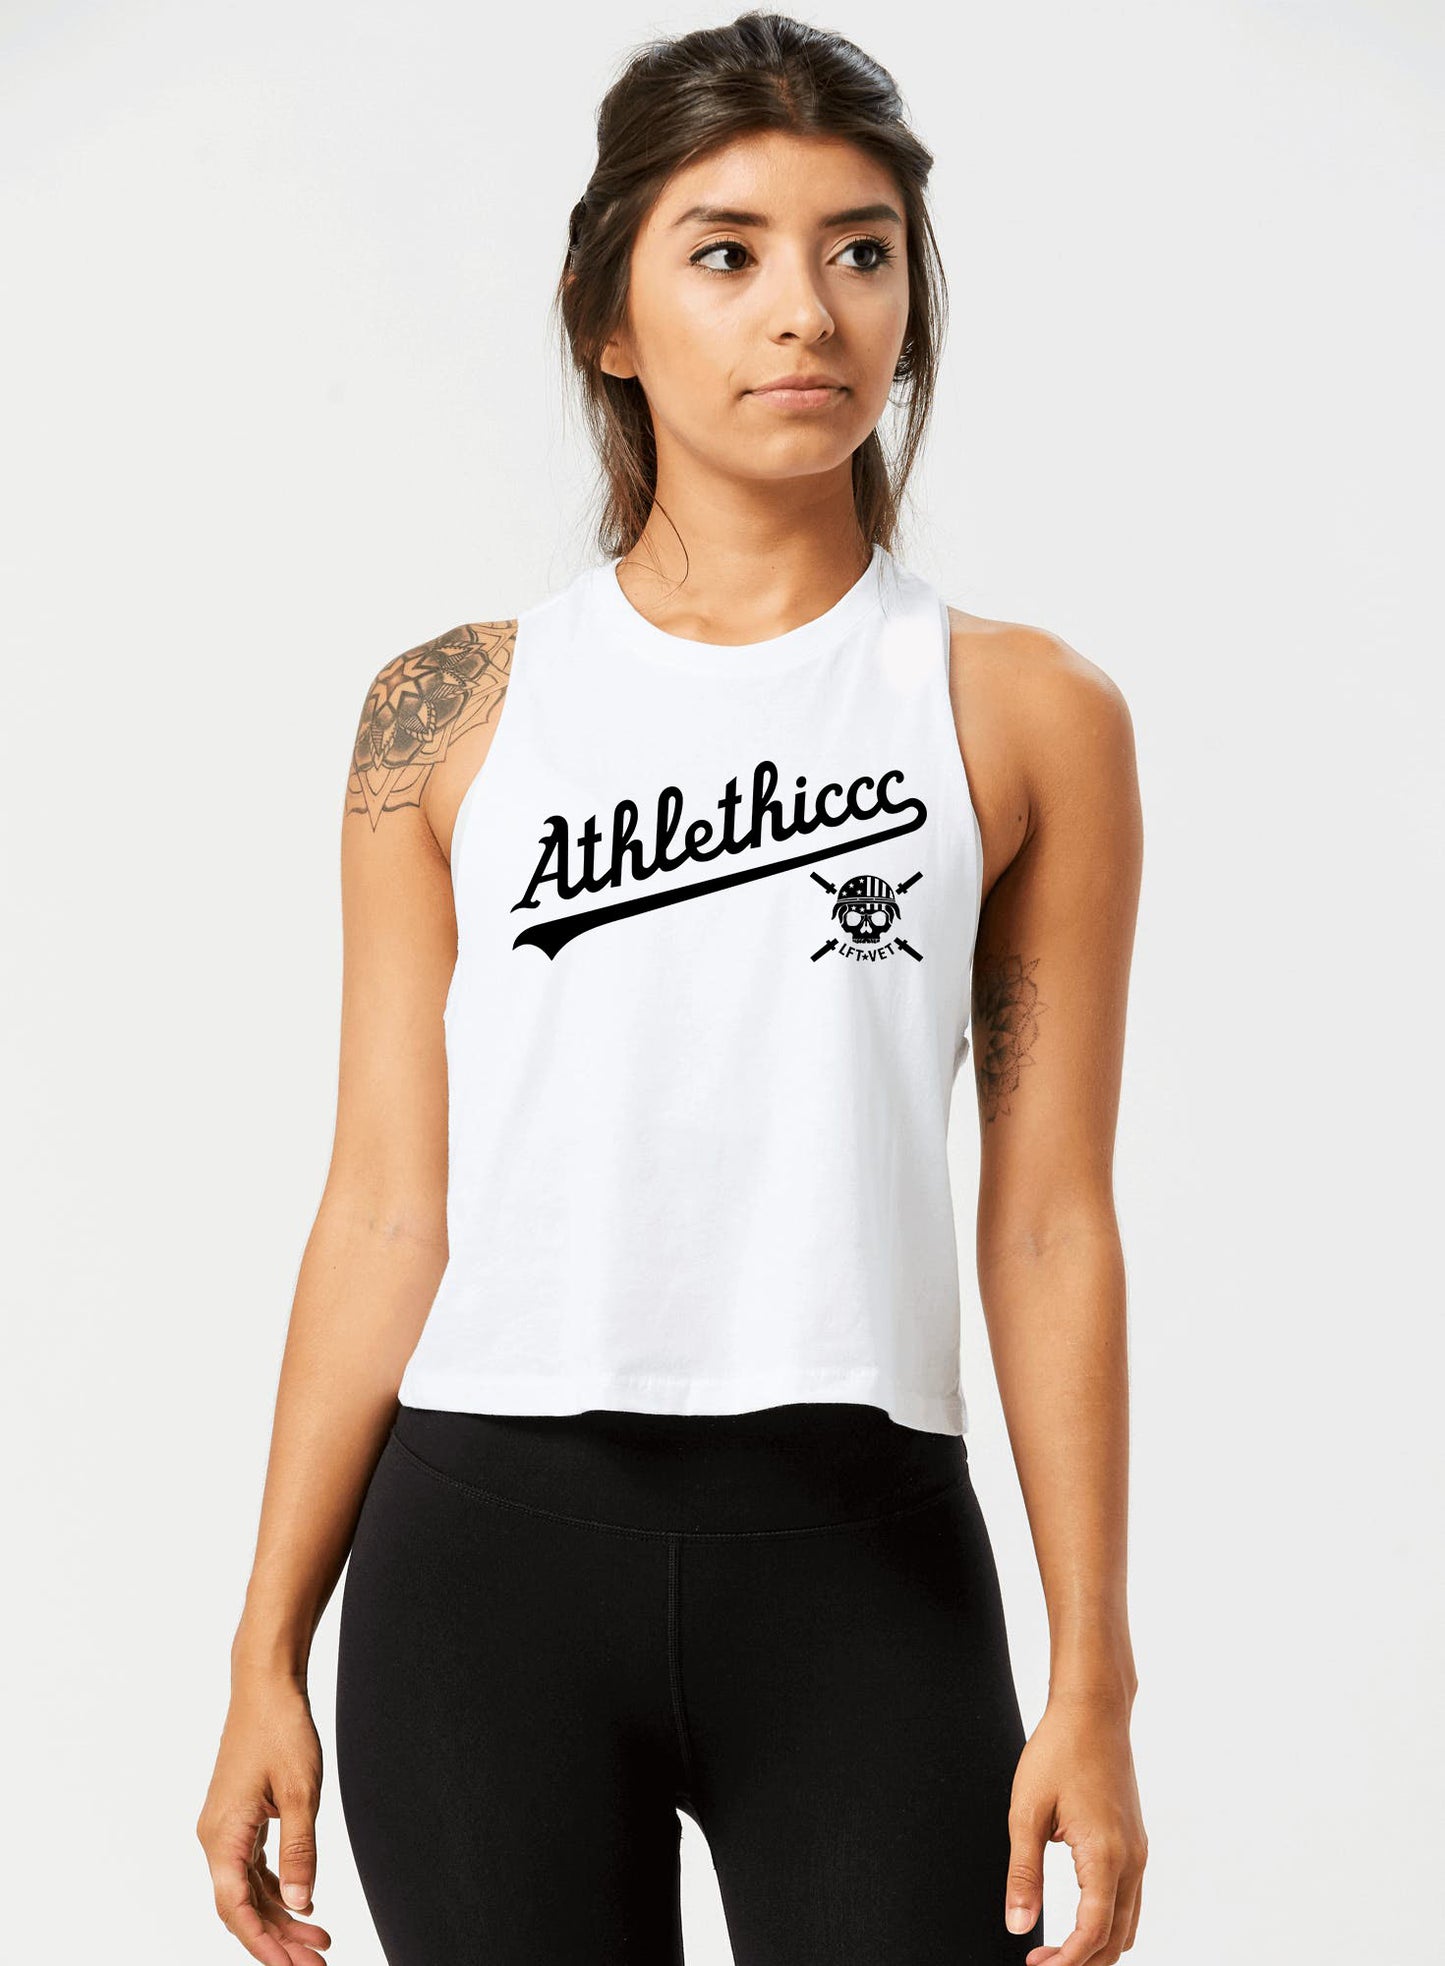 Athlethiccc Racerback Cropped Tank